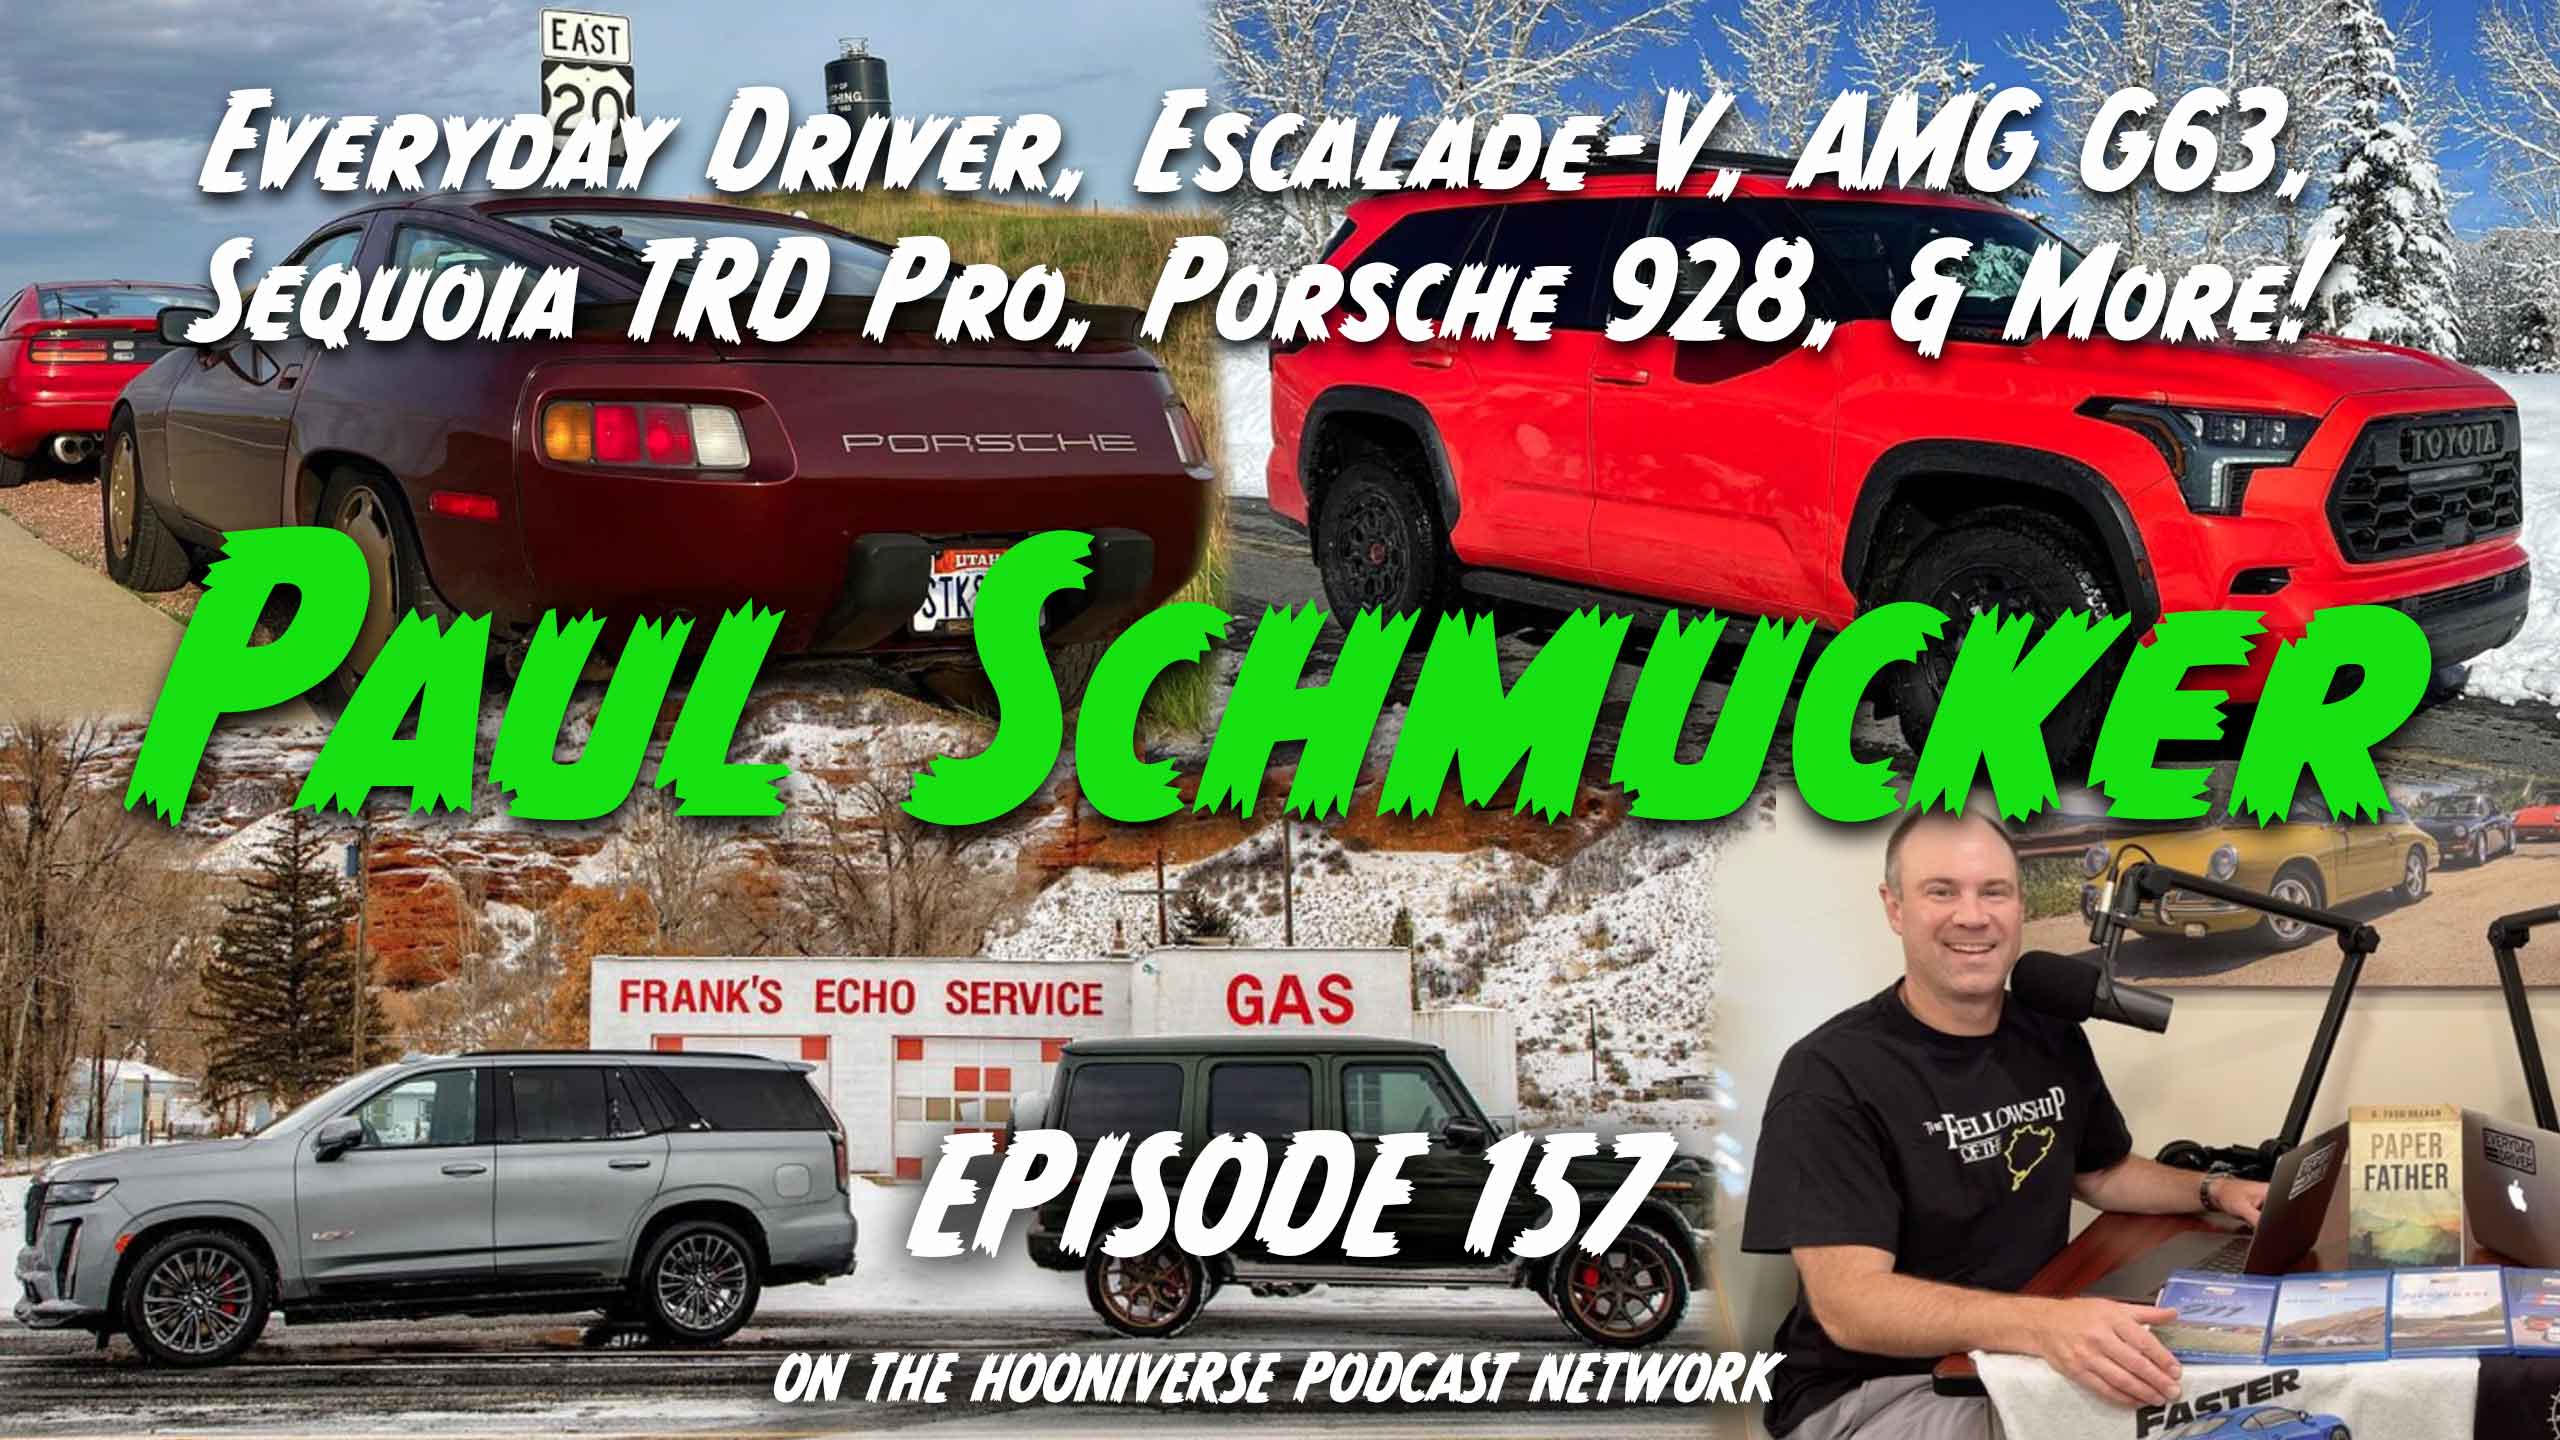 Paul-Schmucker-Everyday-Driver-Off-The-Road-Again-Podcast-Episode-157